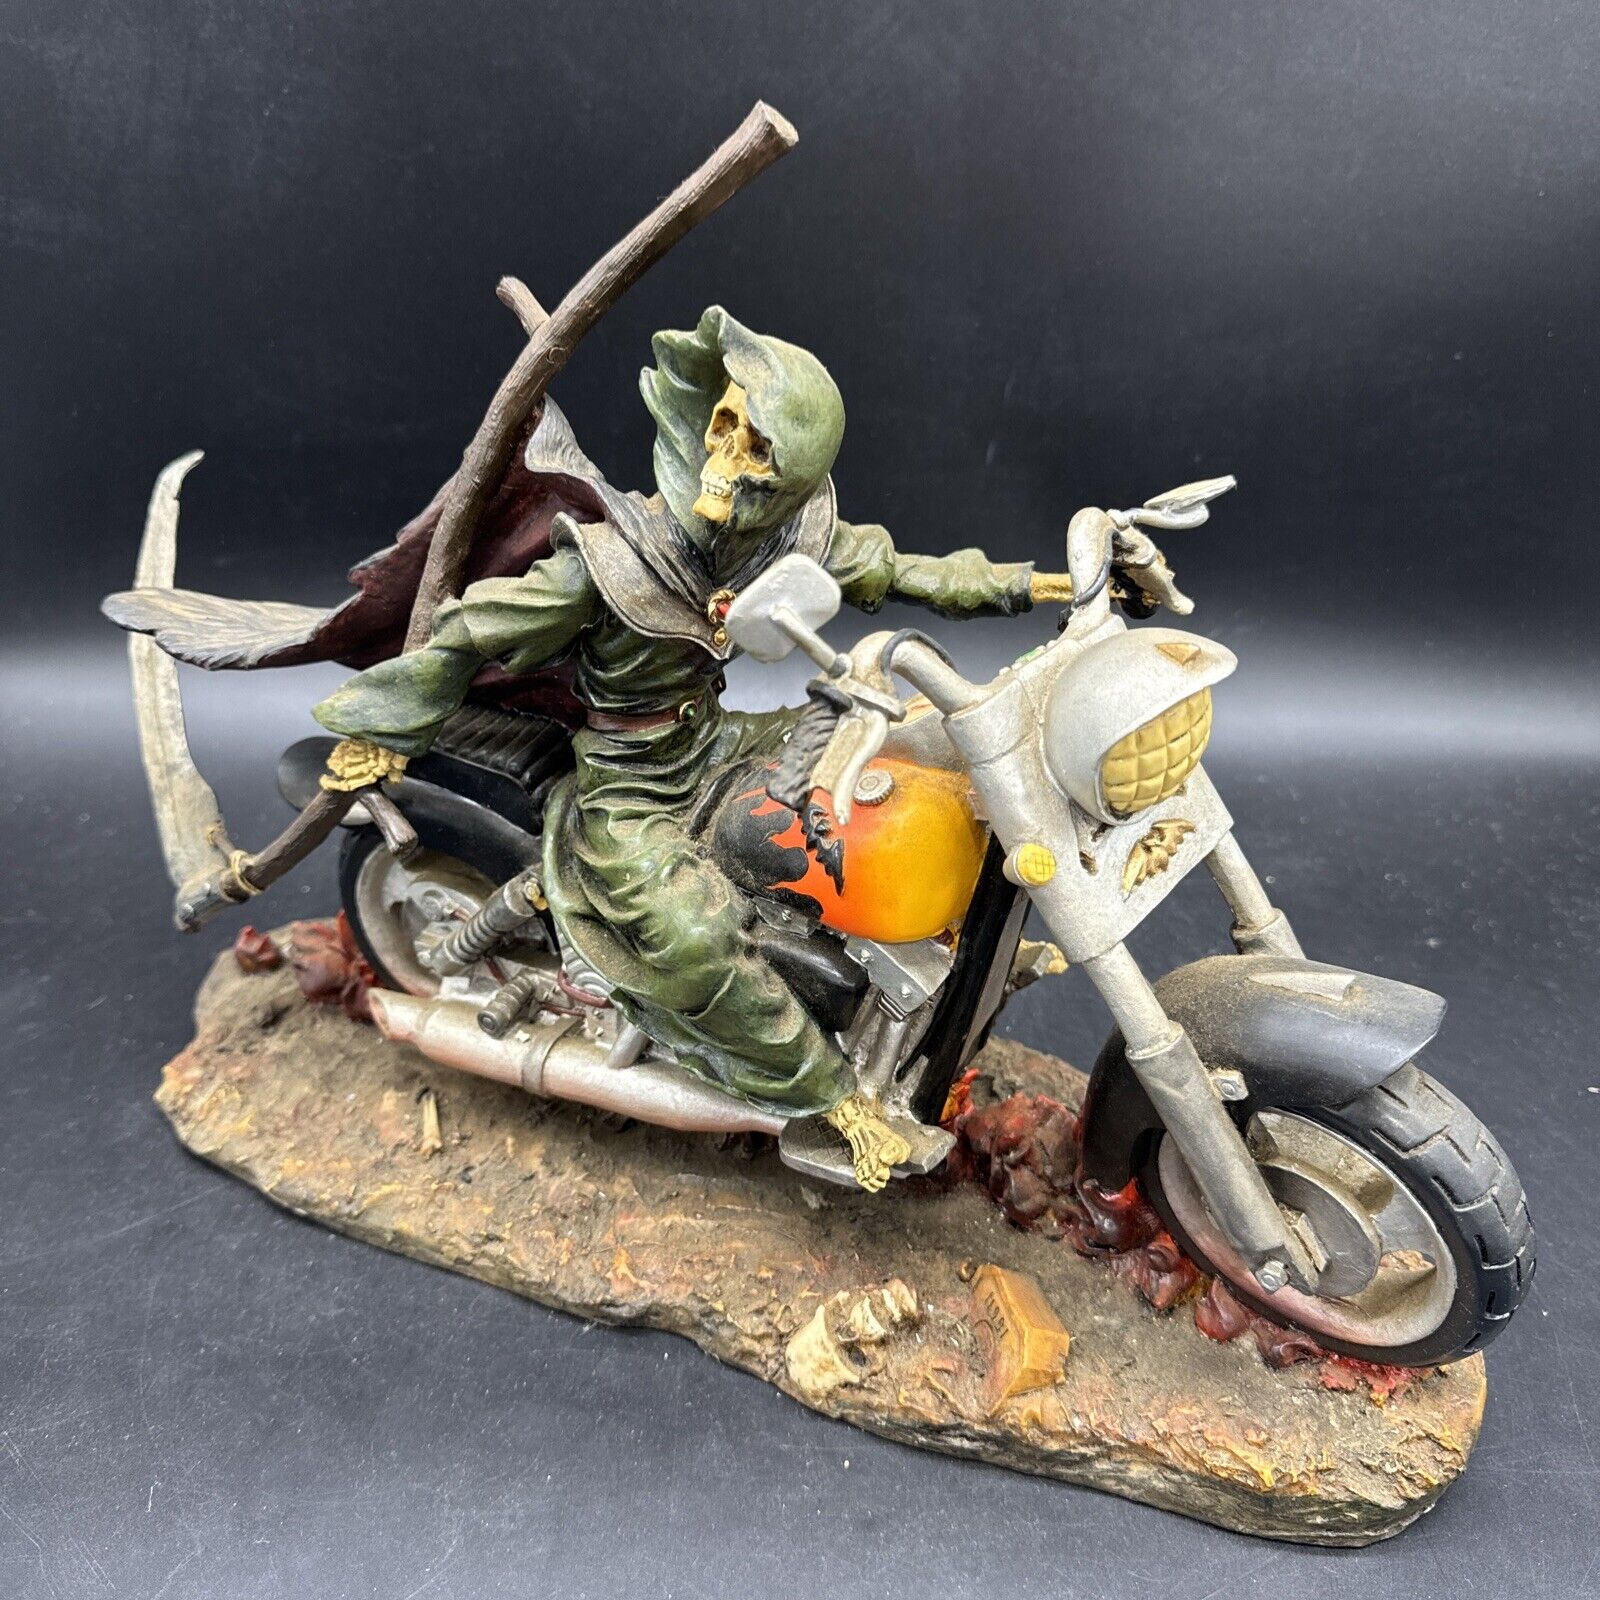 Veronese Summit Collection Myths & Legends Grim Reaper on Motorcycle